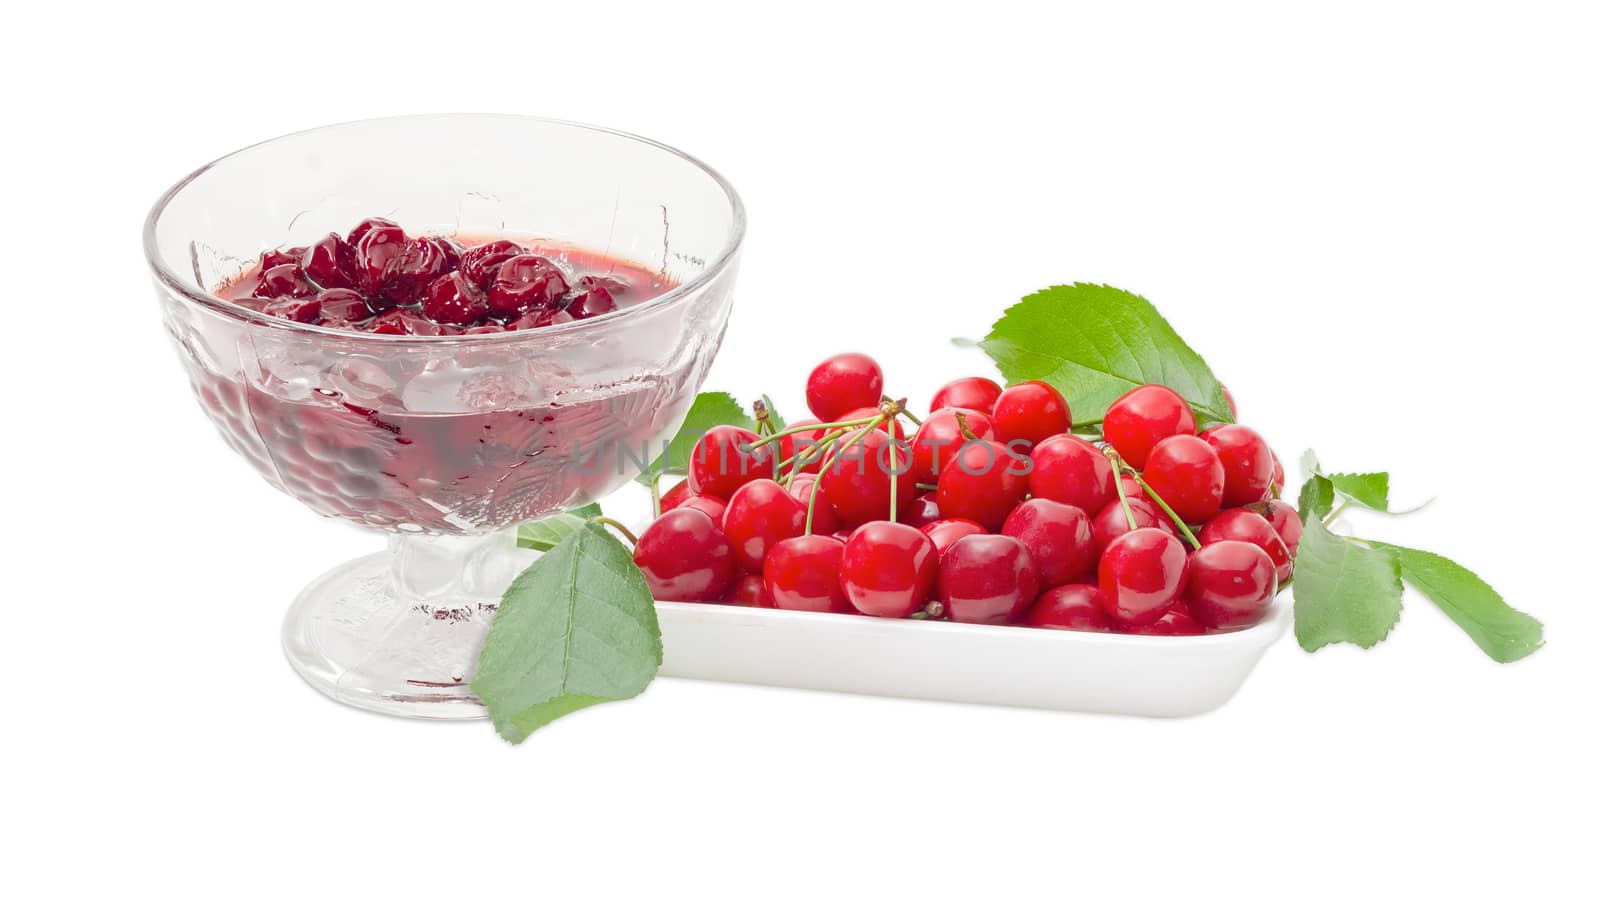 Cherry jam with whole fruits in the glass dessert stem bowl and fresh cherries with the stalks and leaves in in the foam food container beside on a light background
